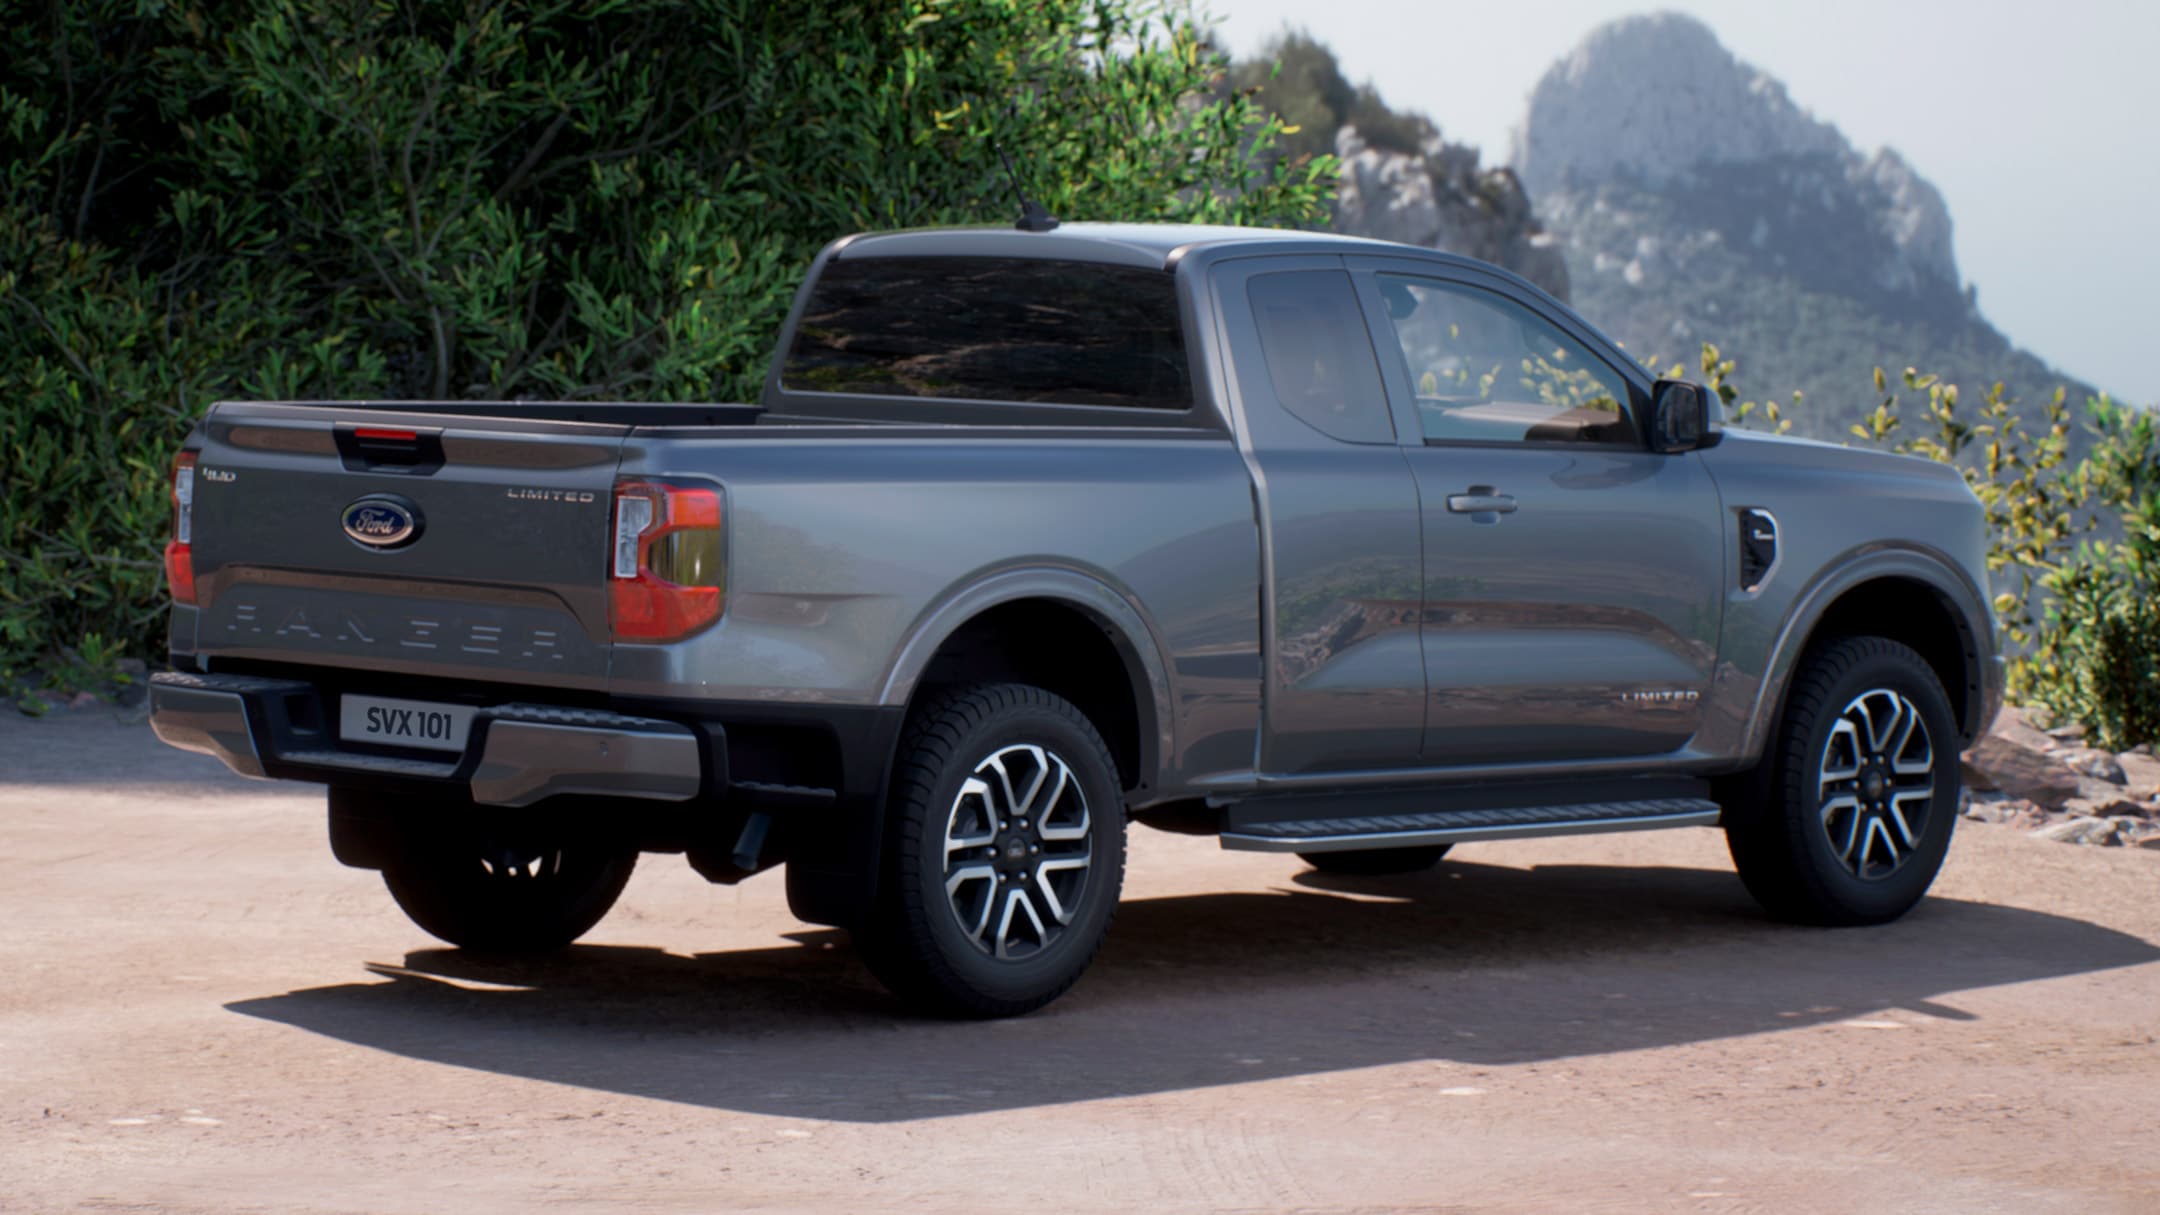 All-New Ranger in Carbonized Grey 3/4 rear view